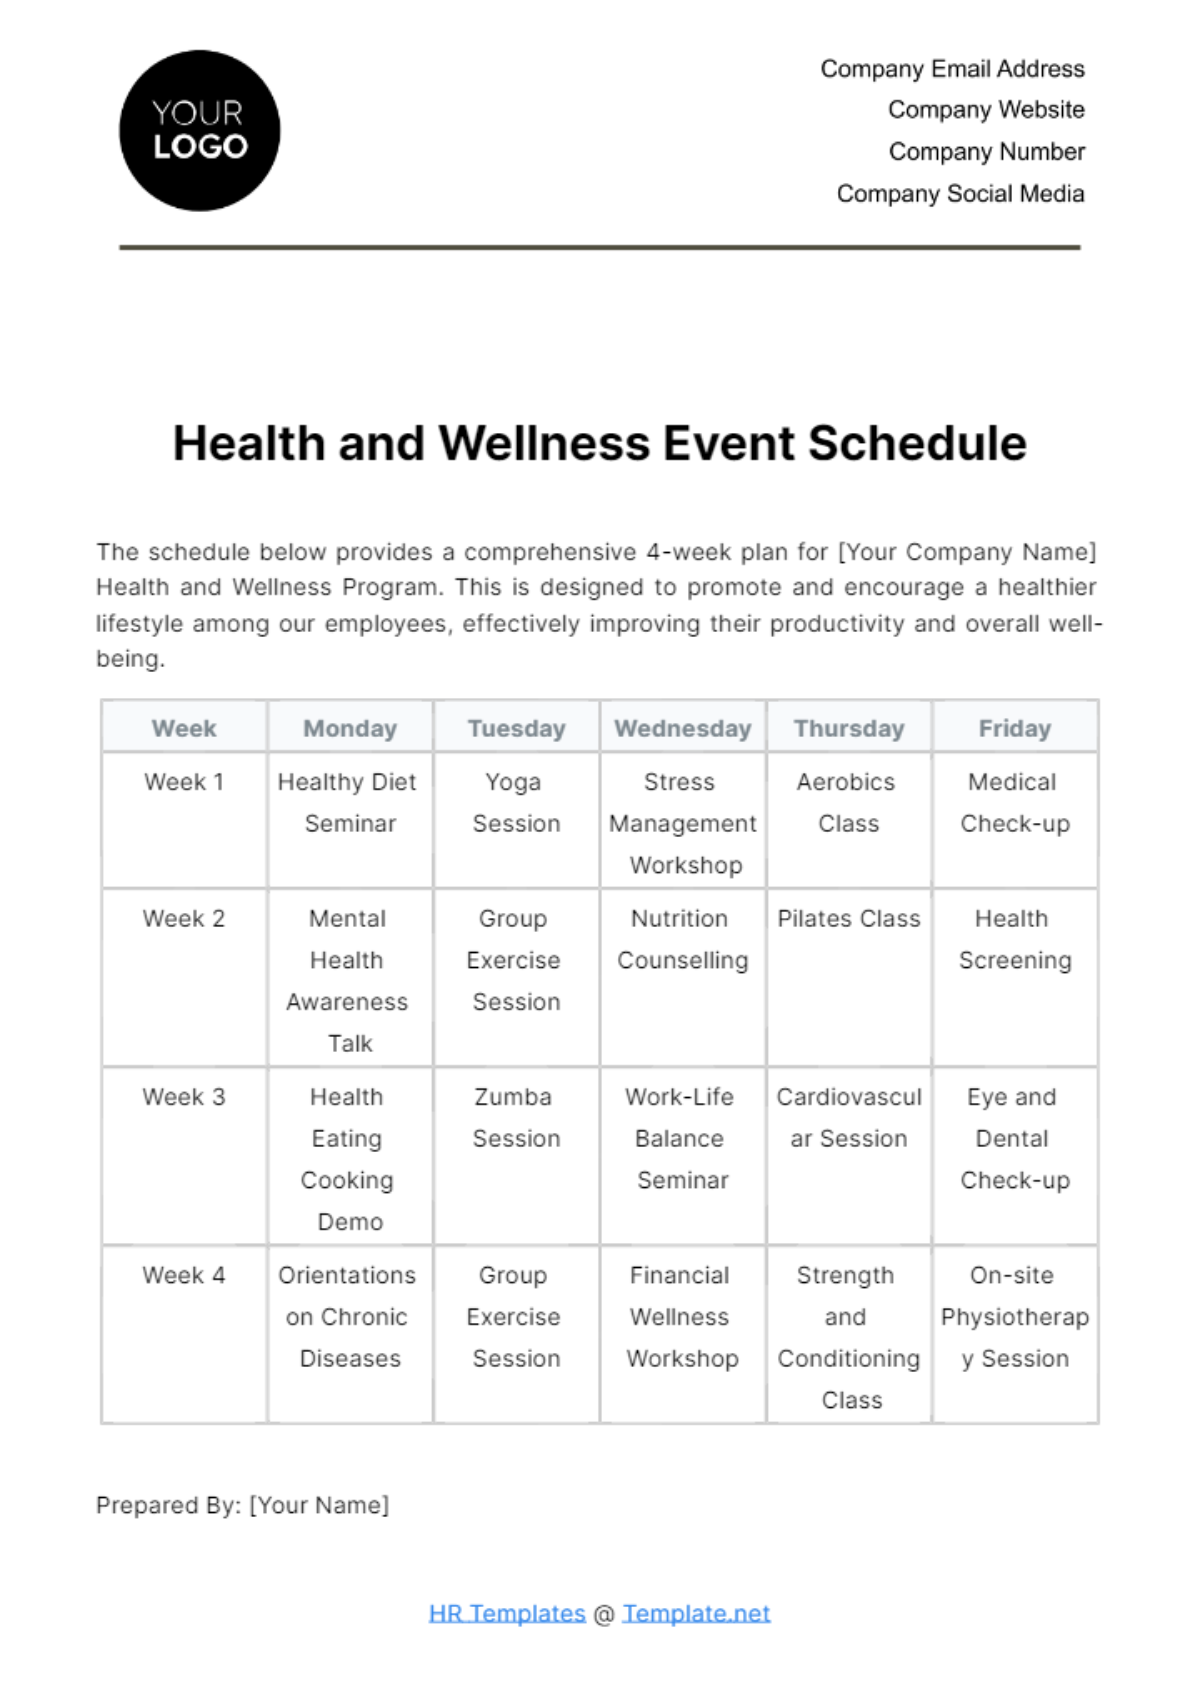 Free Health and Wellness Event Schedule HR Template